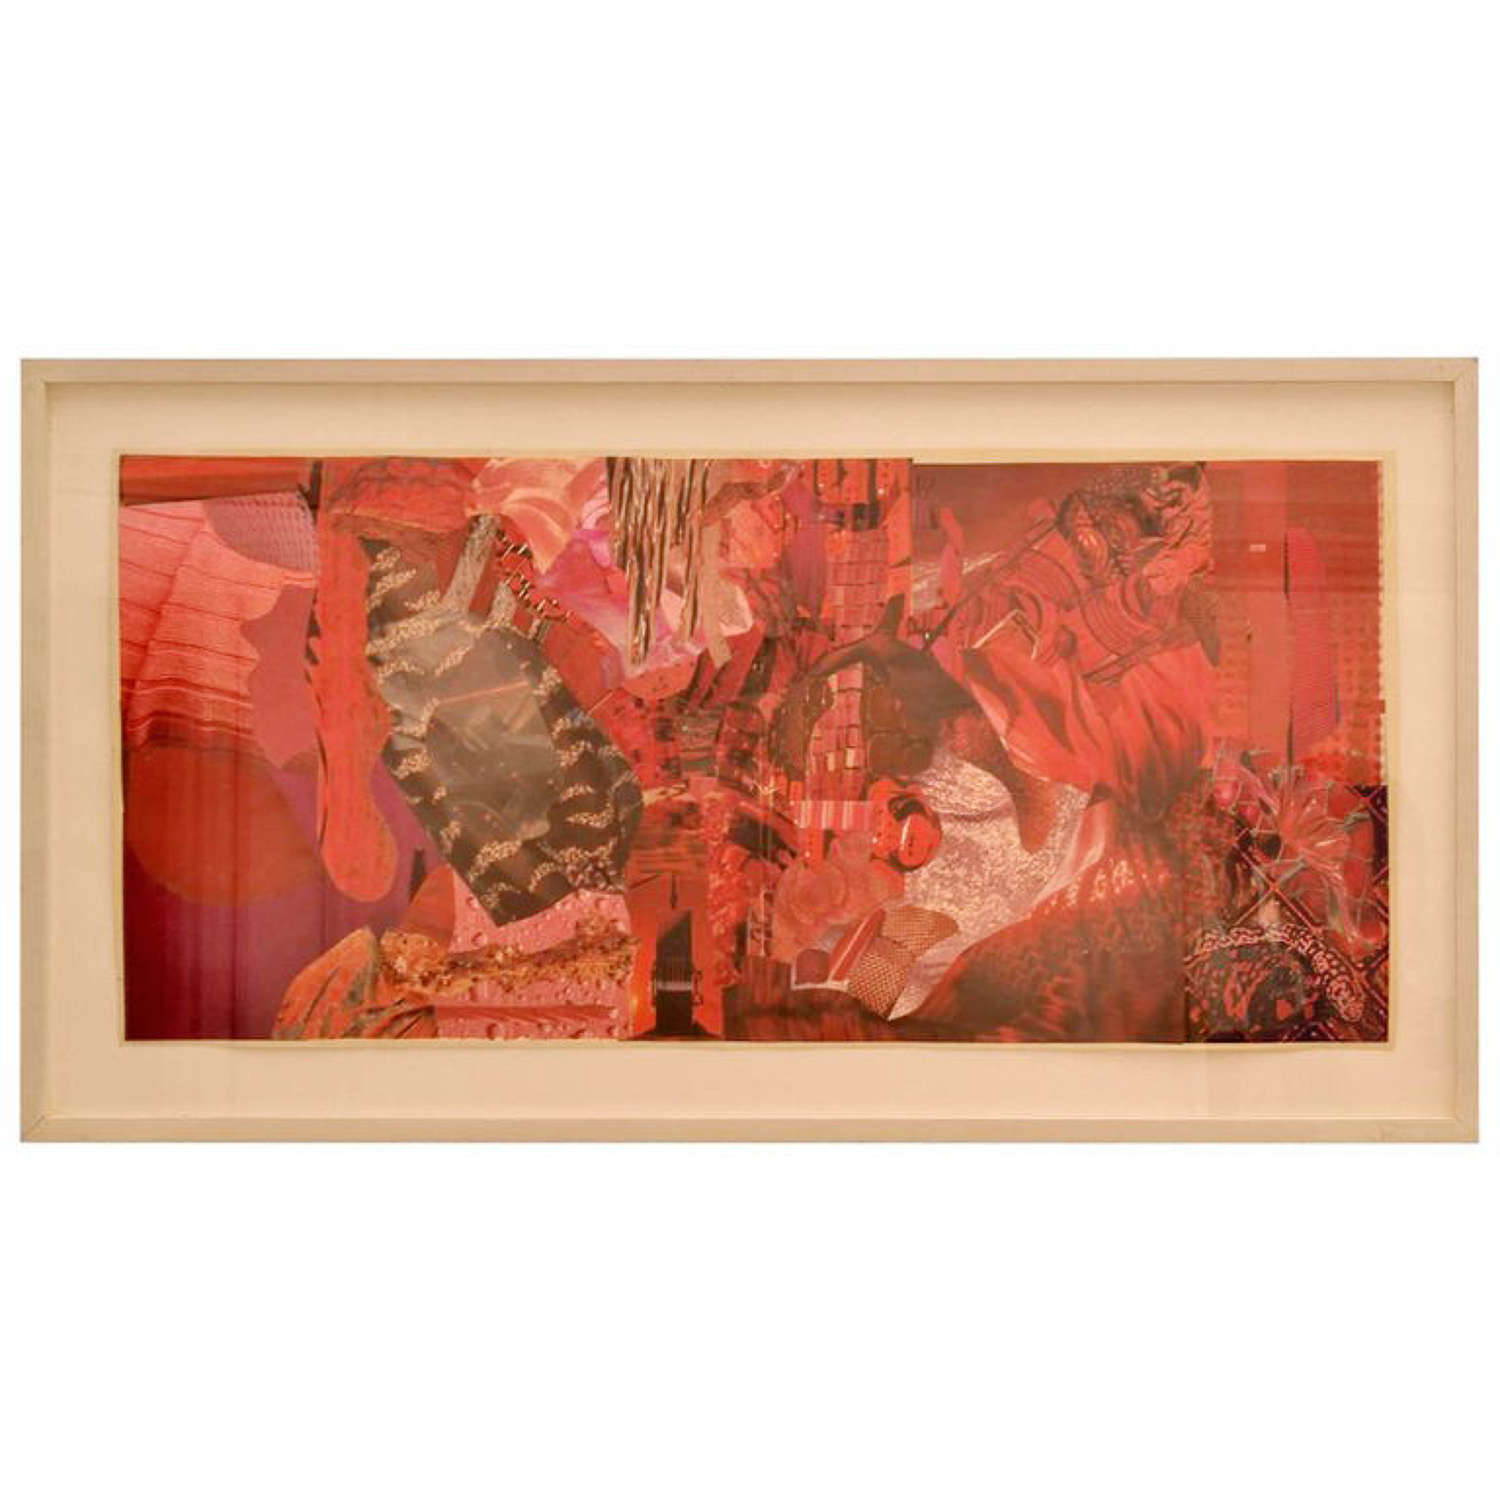 Abstract Collage Art in Red by B Allan, UK, 1993